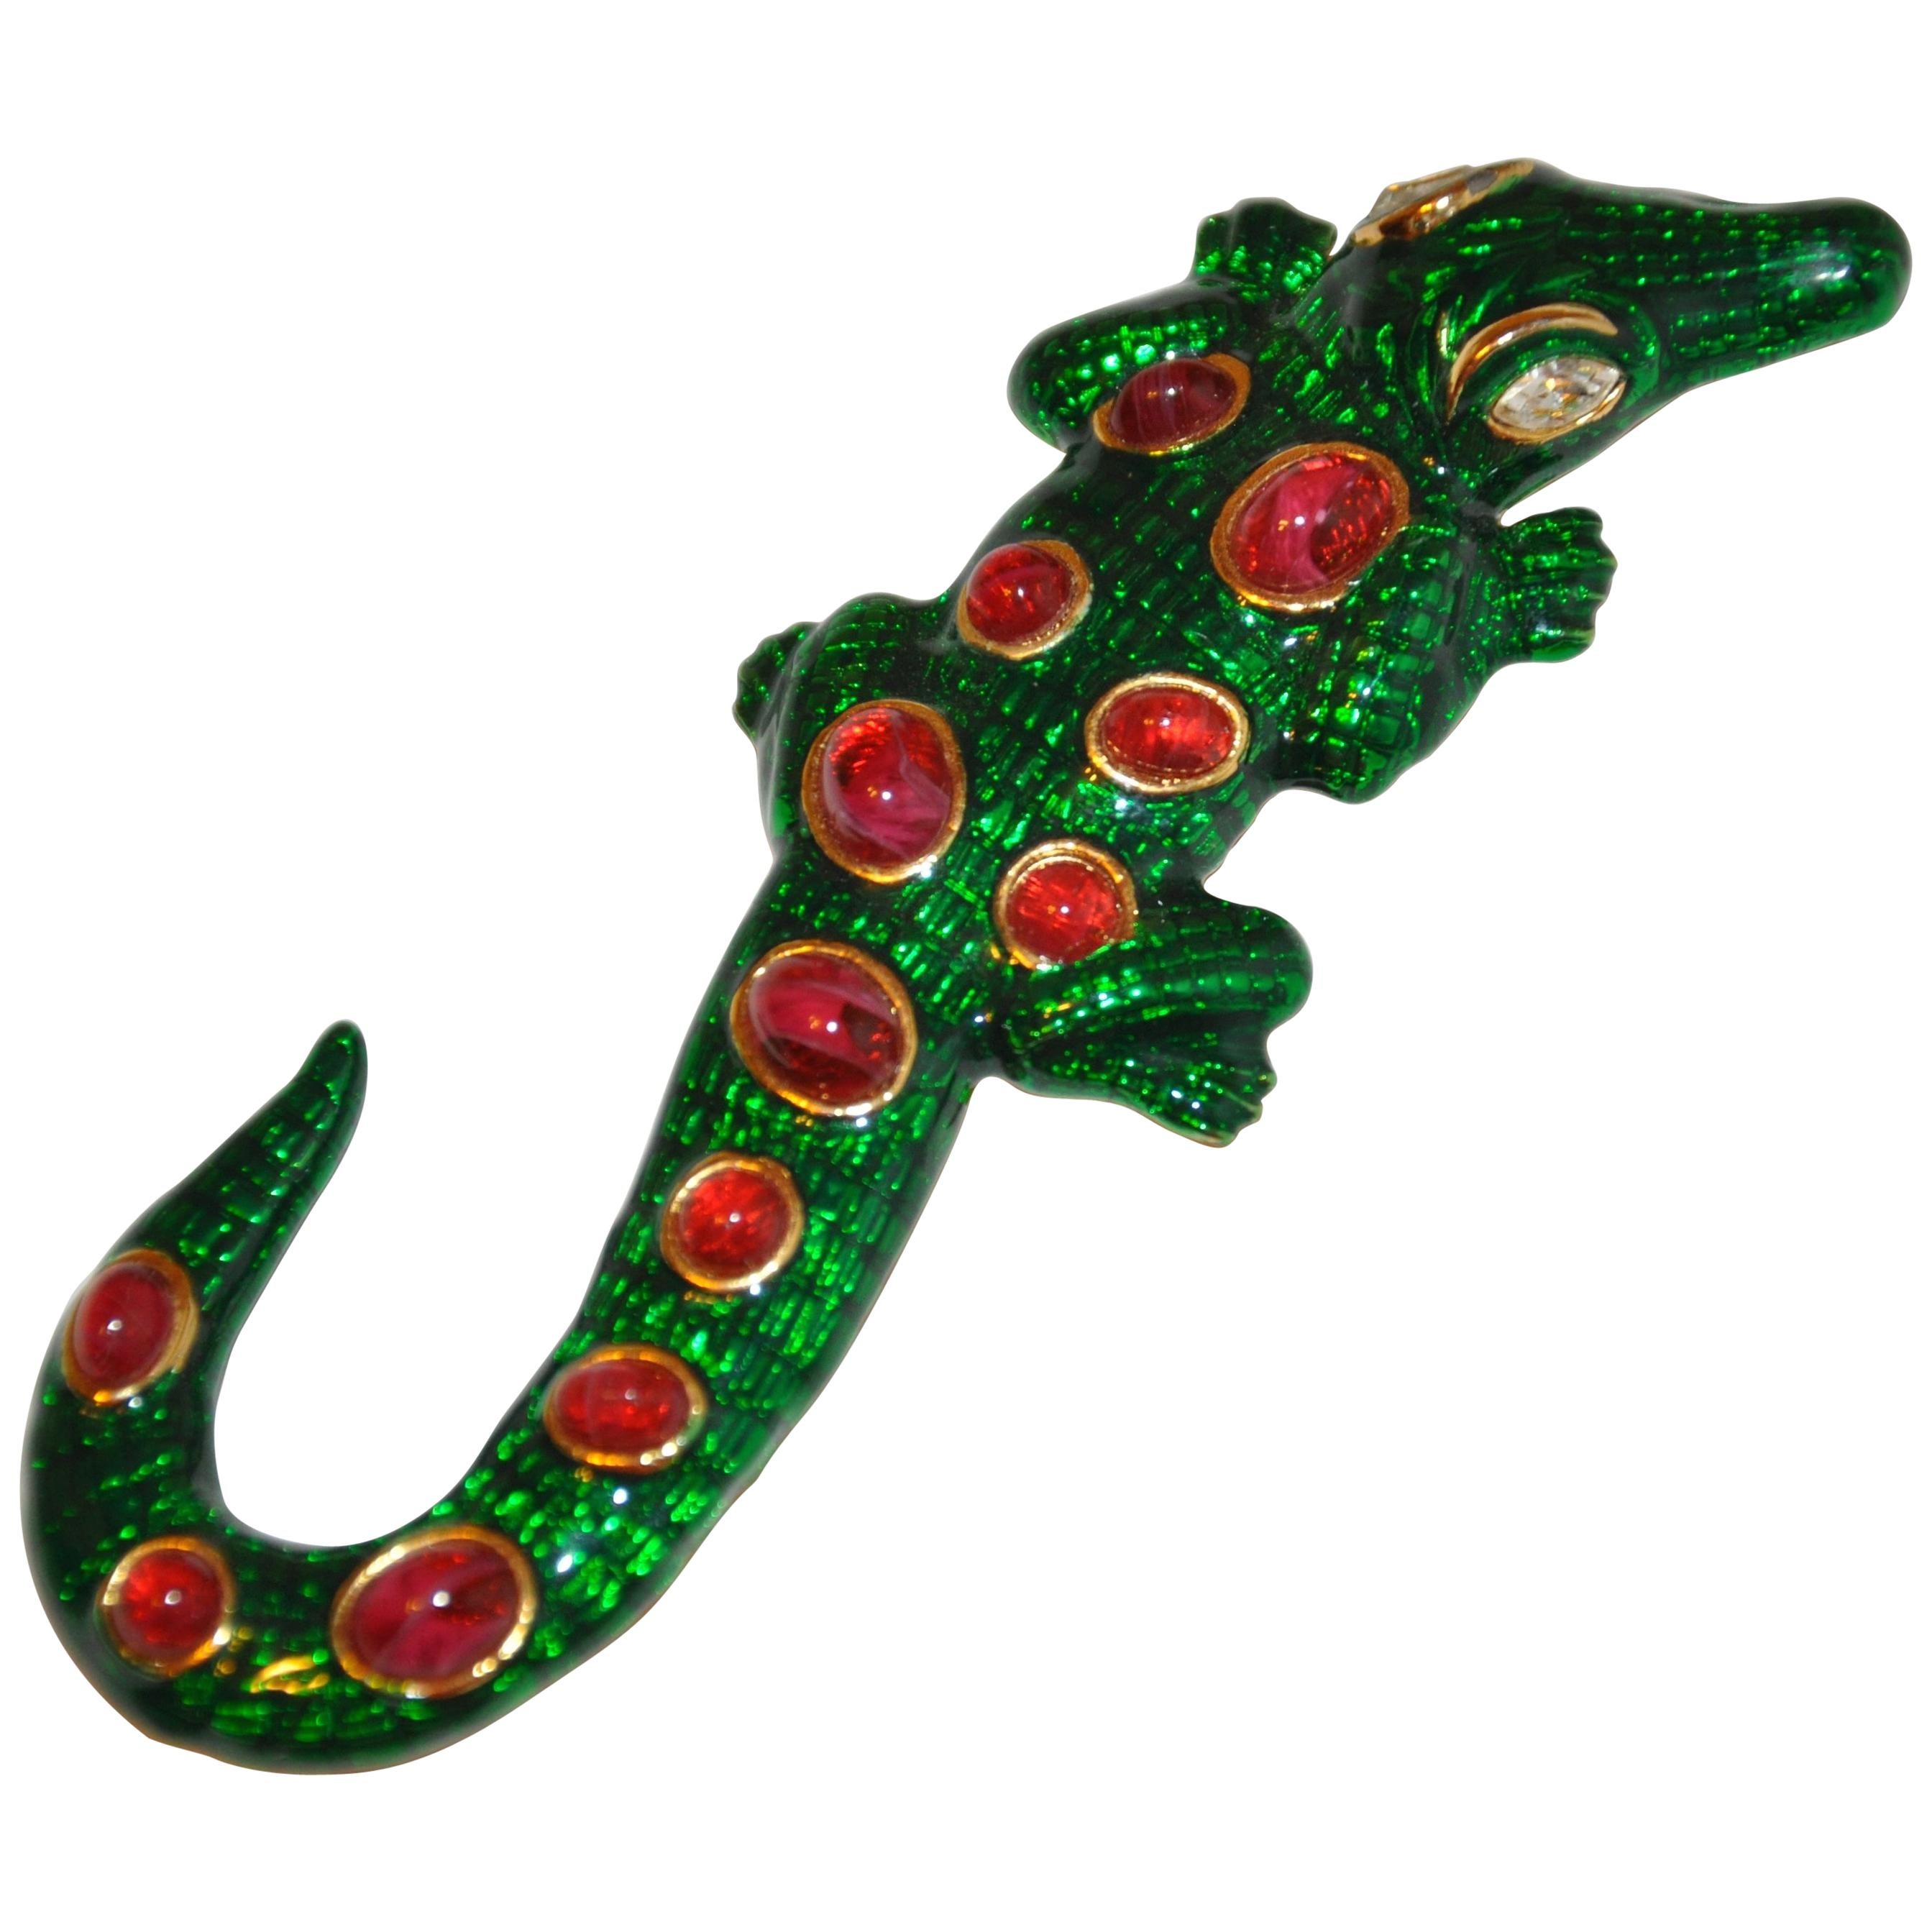 Kenneth Lane Whimsical Green Enamel with Ruby-Like Accent "Alligator" Brooch